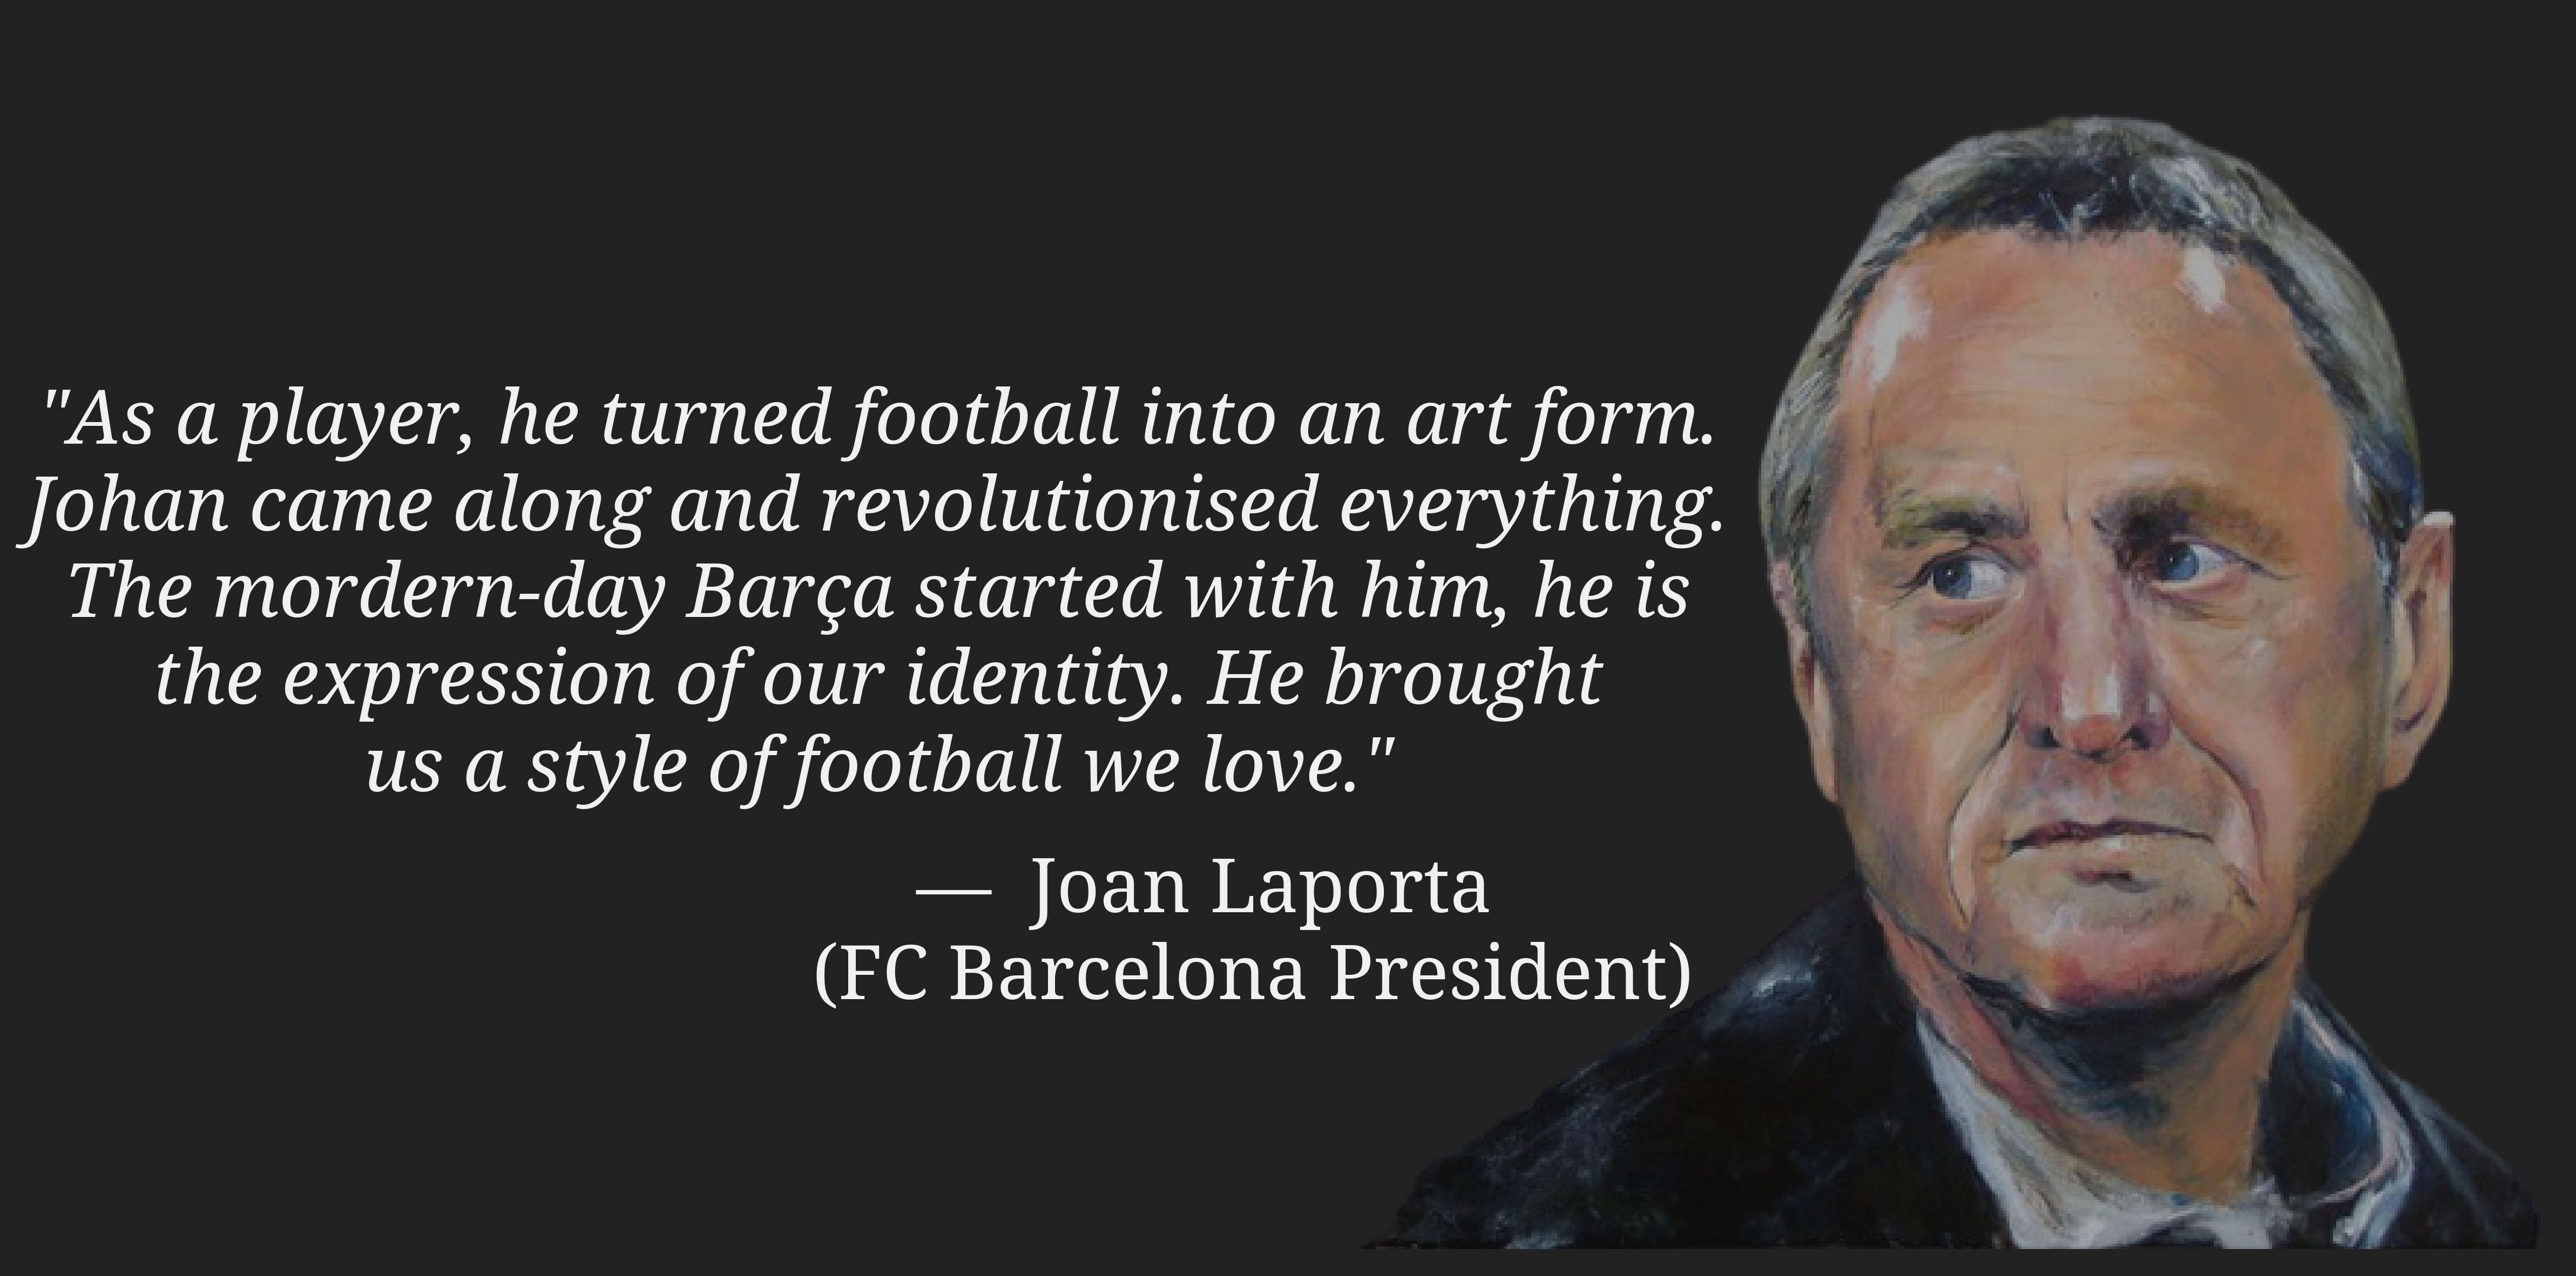 quote-by-laporta